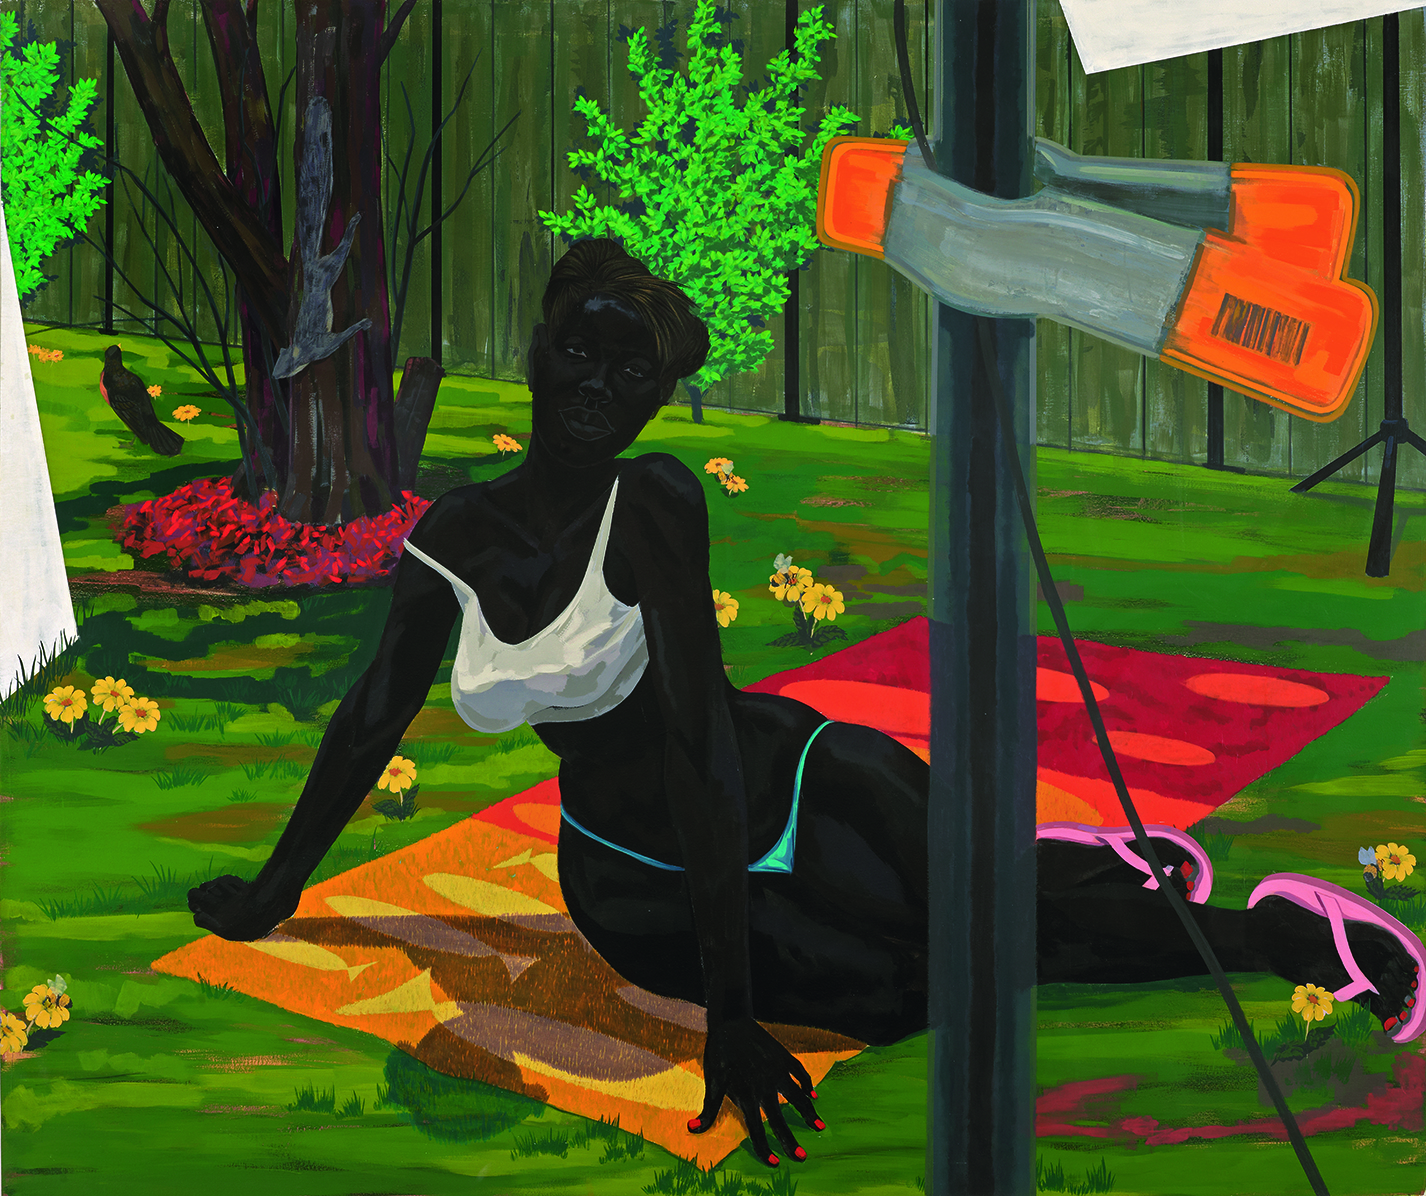 Kerry James Marshall, Untitled (Beach Towel), 2014. Acrylic on PVC panel, 152 x 182 CM. Picture credit: © Kerry James Marshall